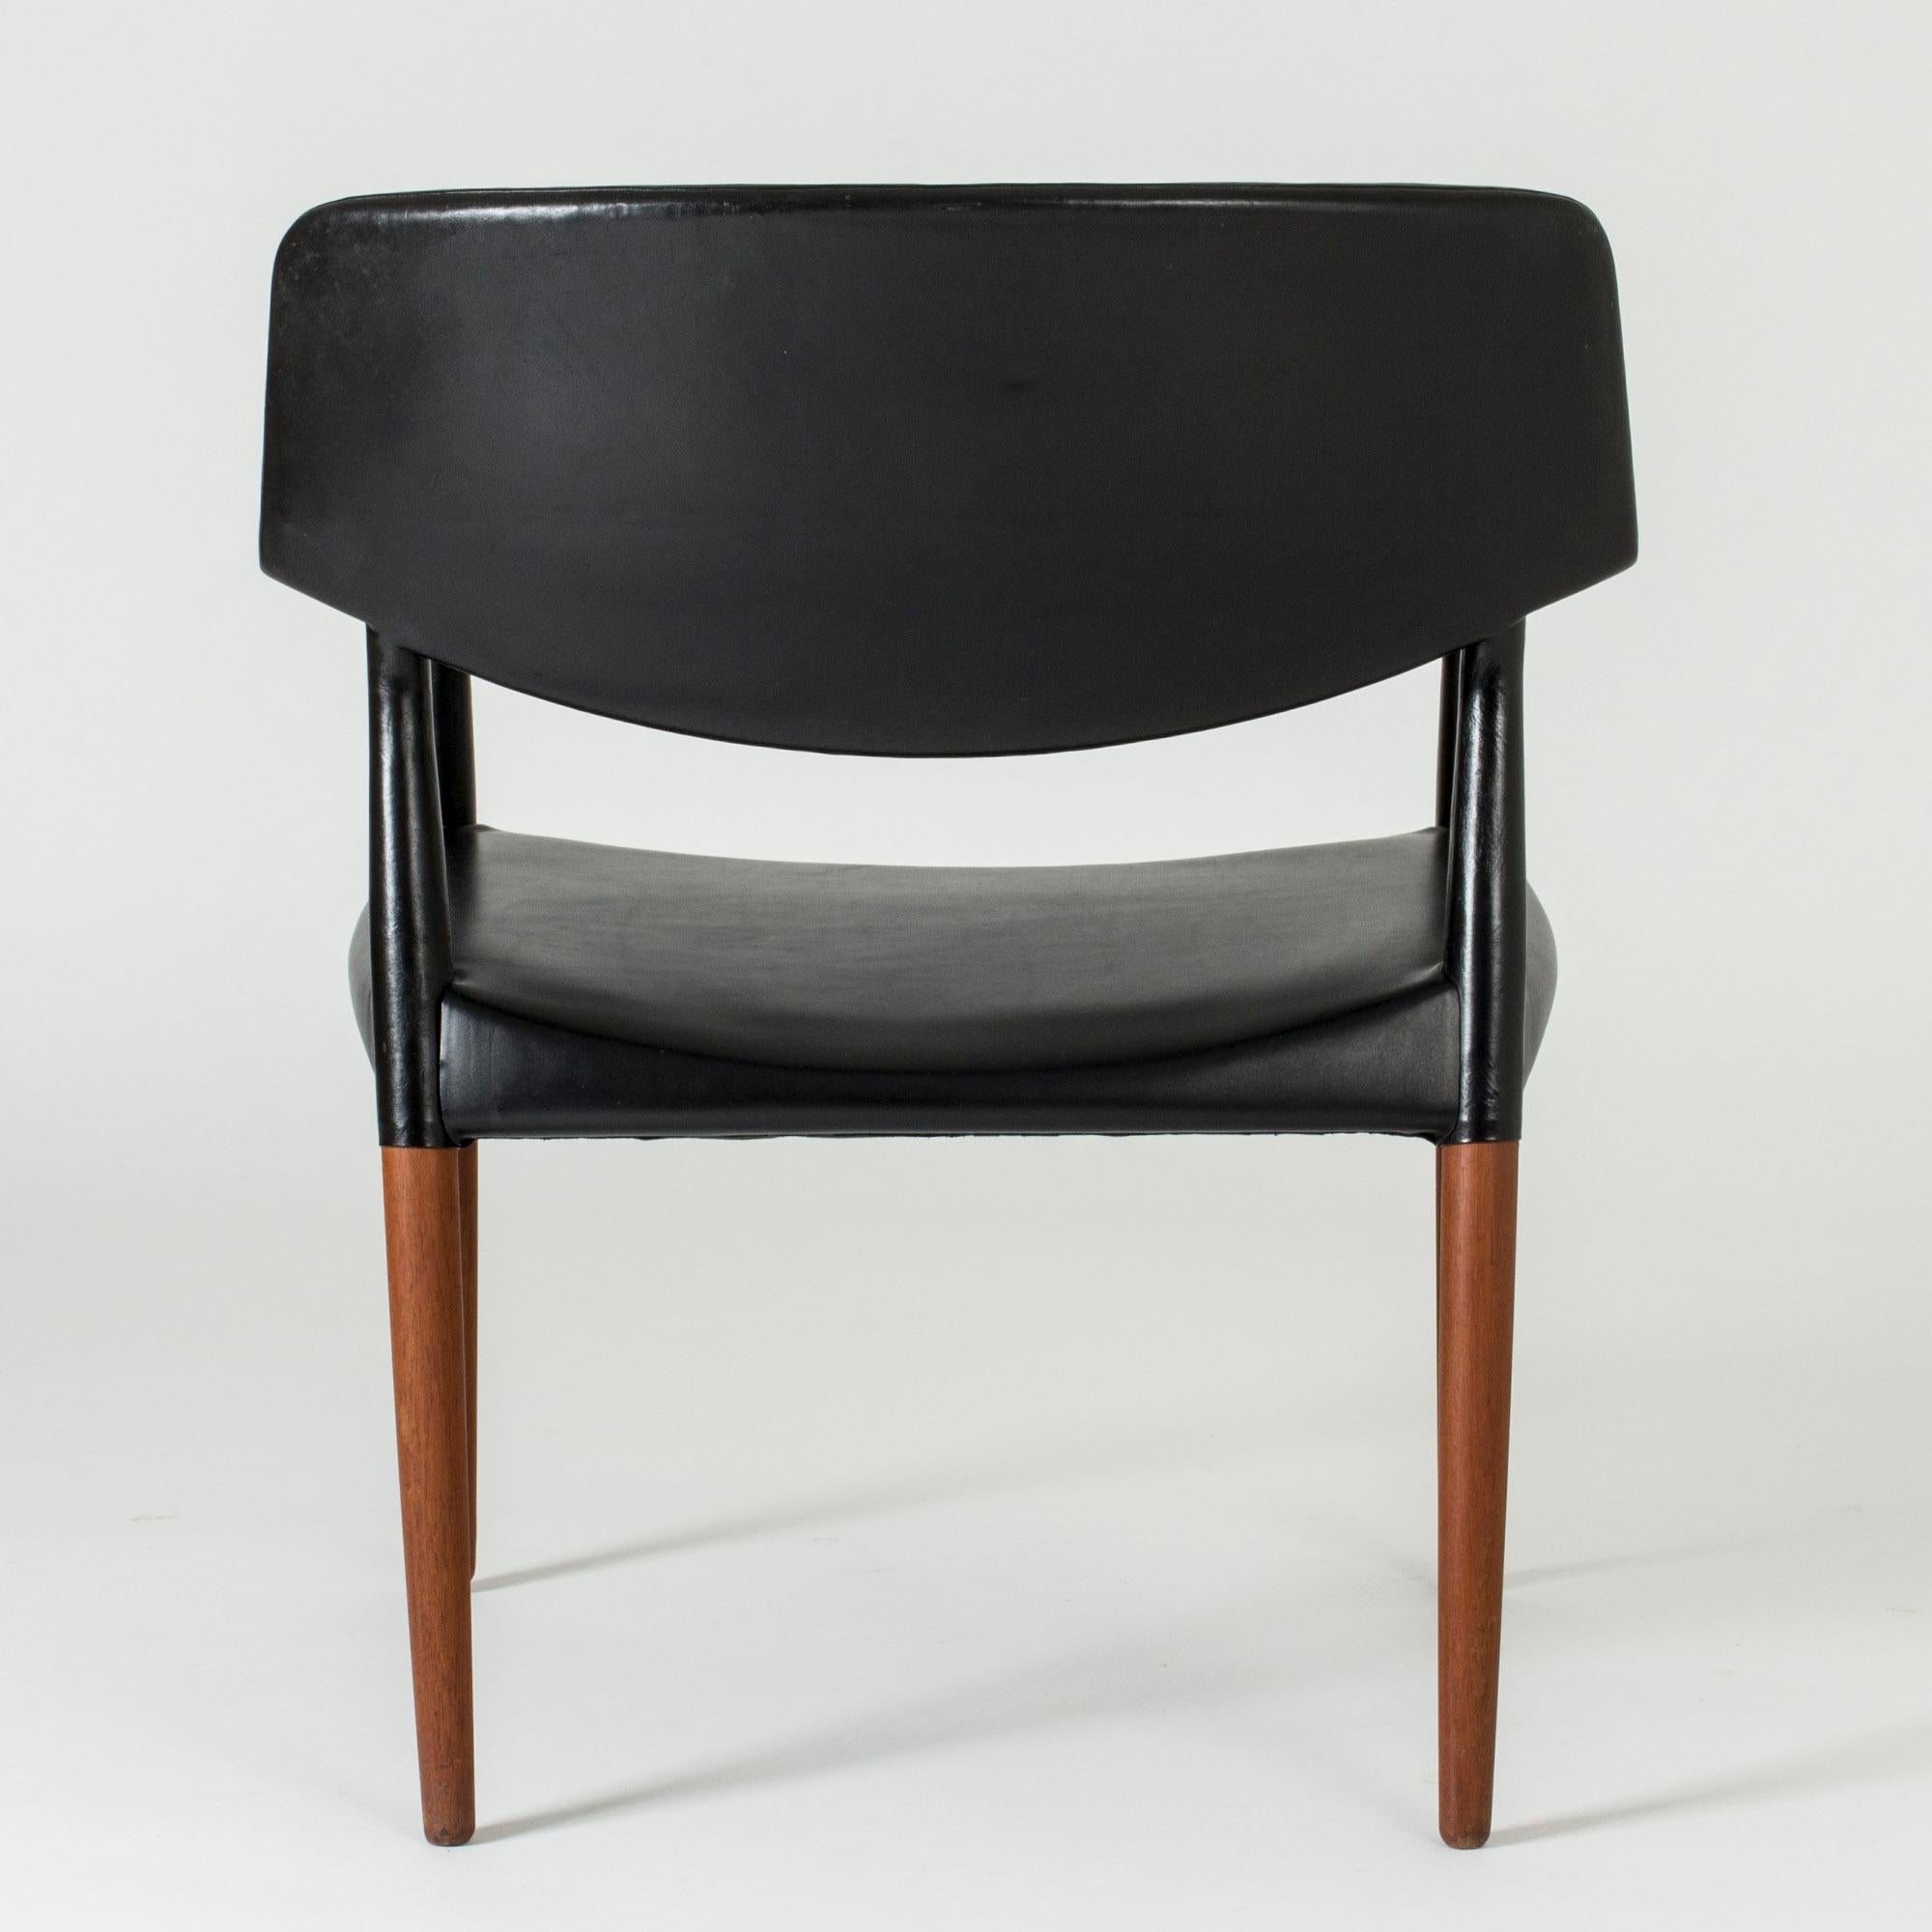 Swedish Midcentury Leather Armchair by Ejnar Larsen & Aksel Bender Madsen for Willy Beck For Sale